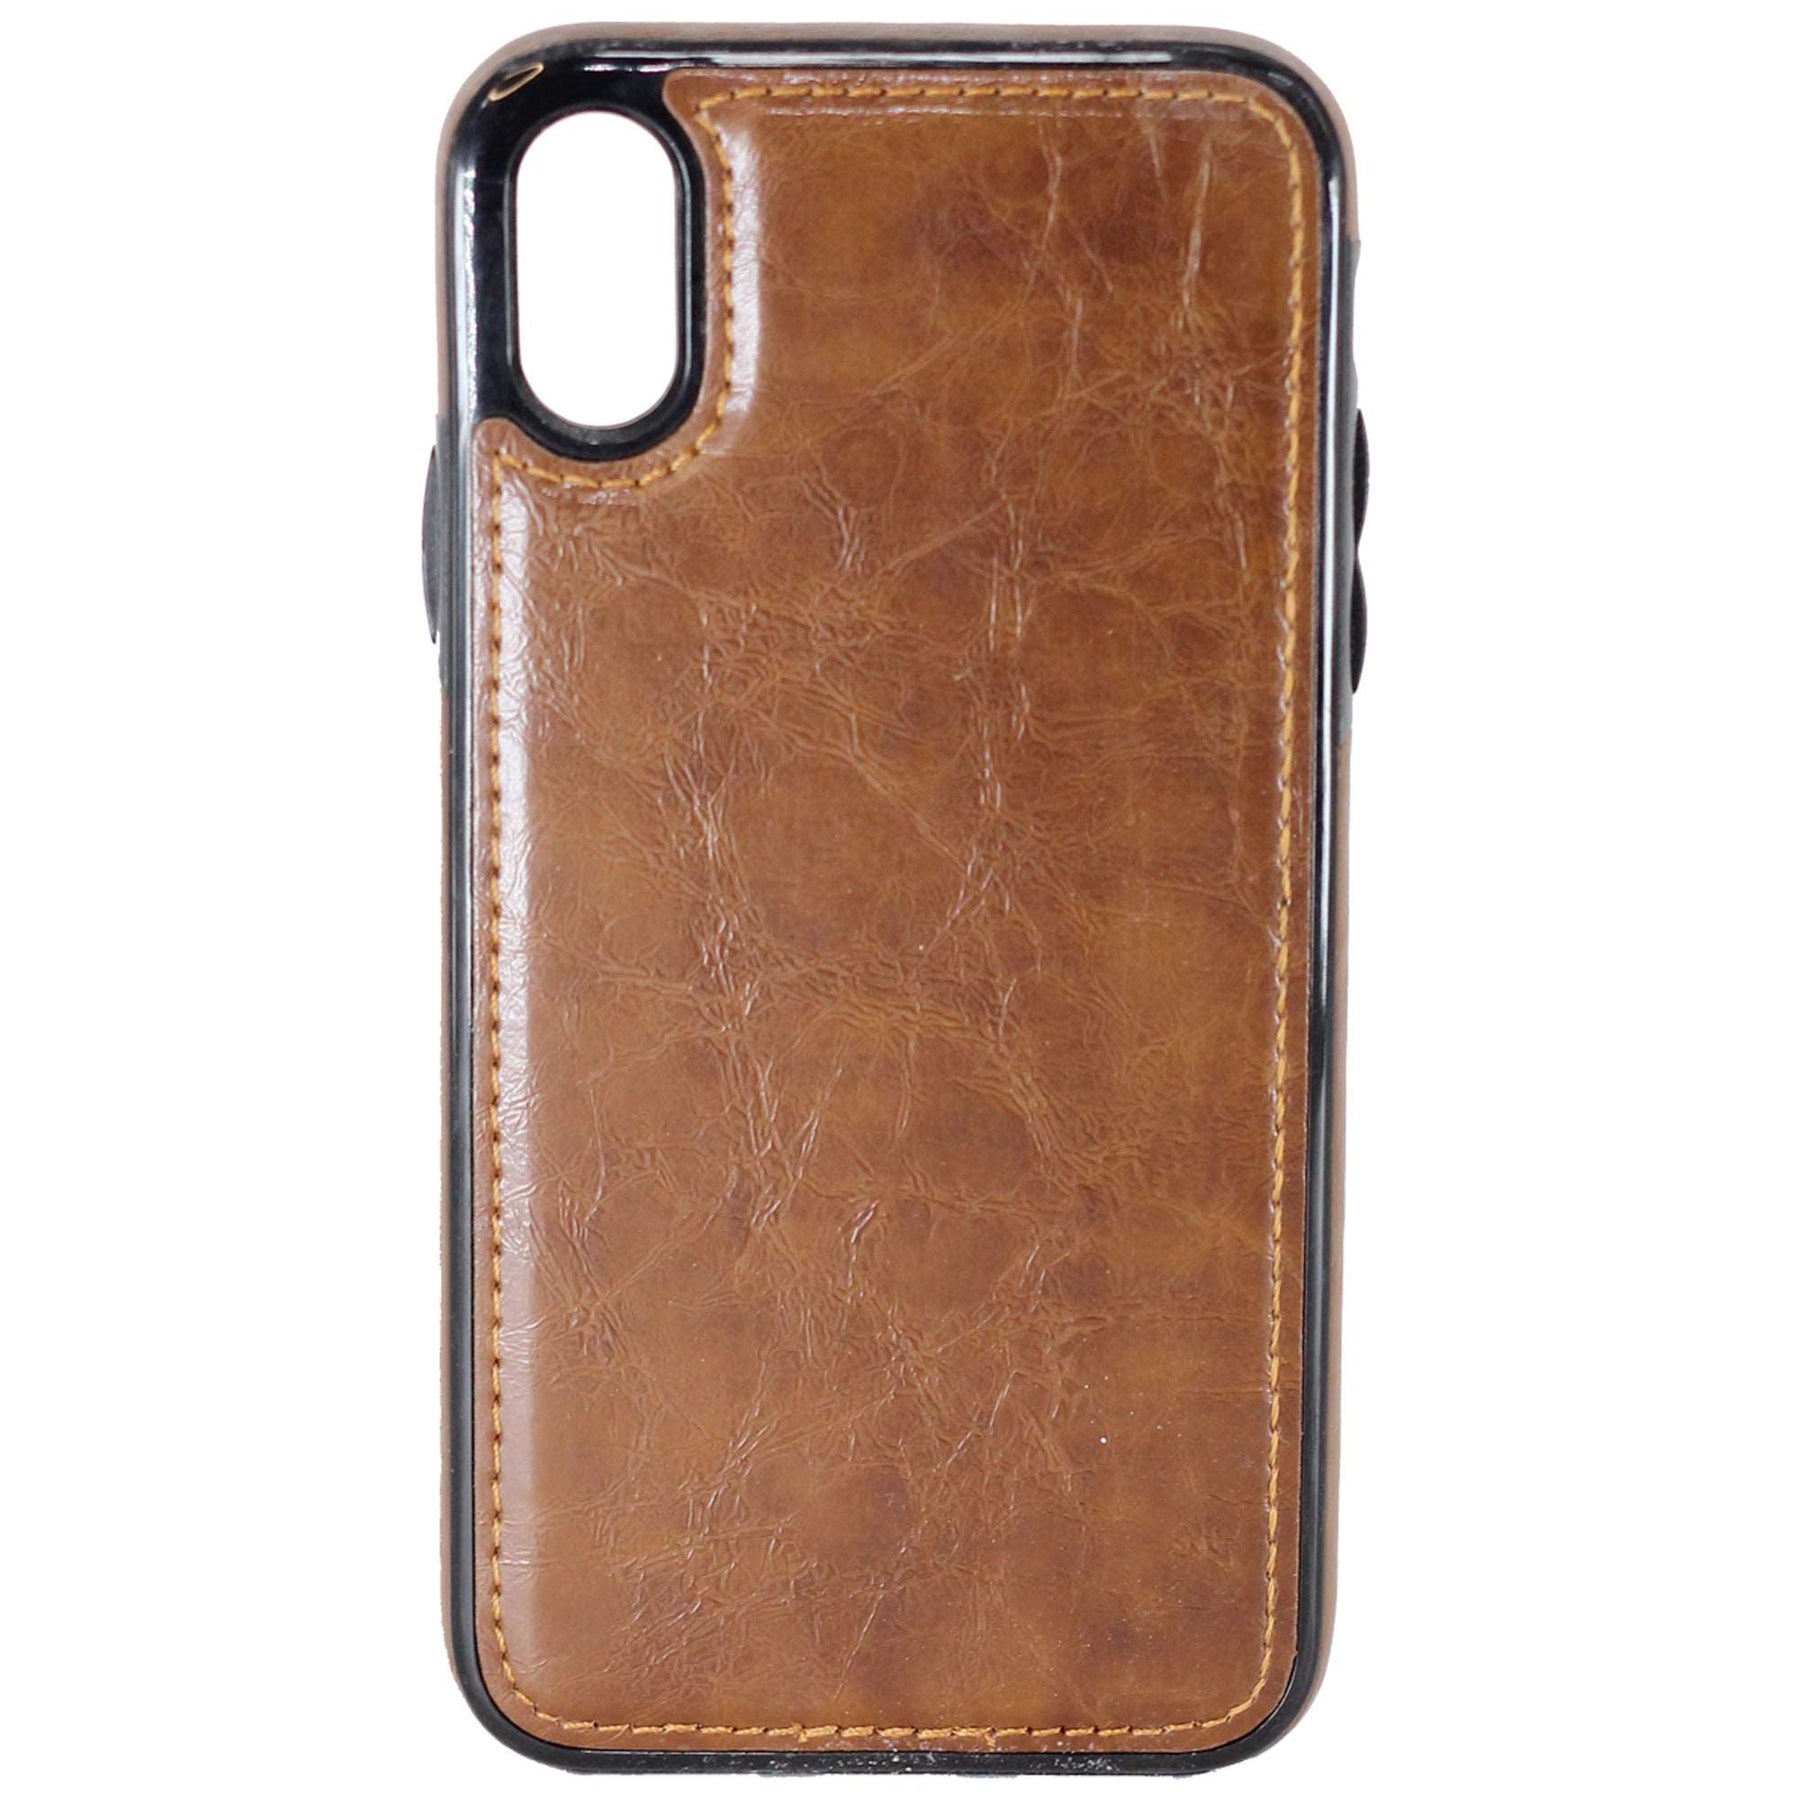 Apple iPhone X & XS Leather Back Cover Case Brown